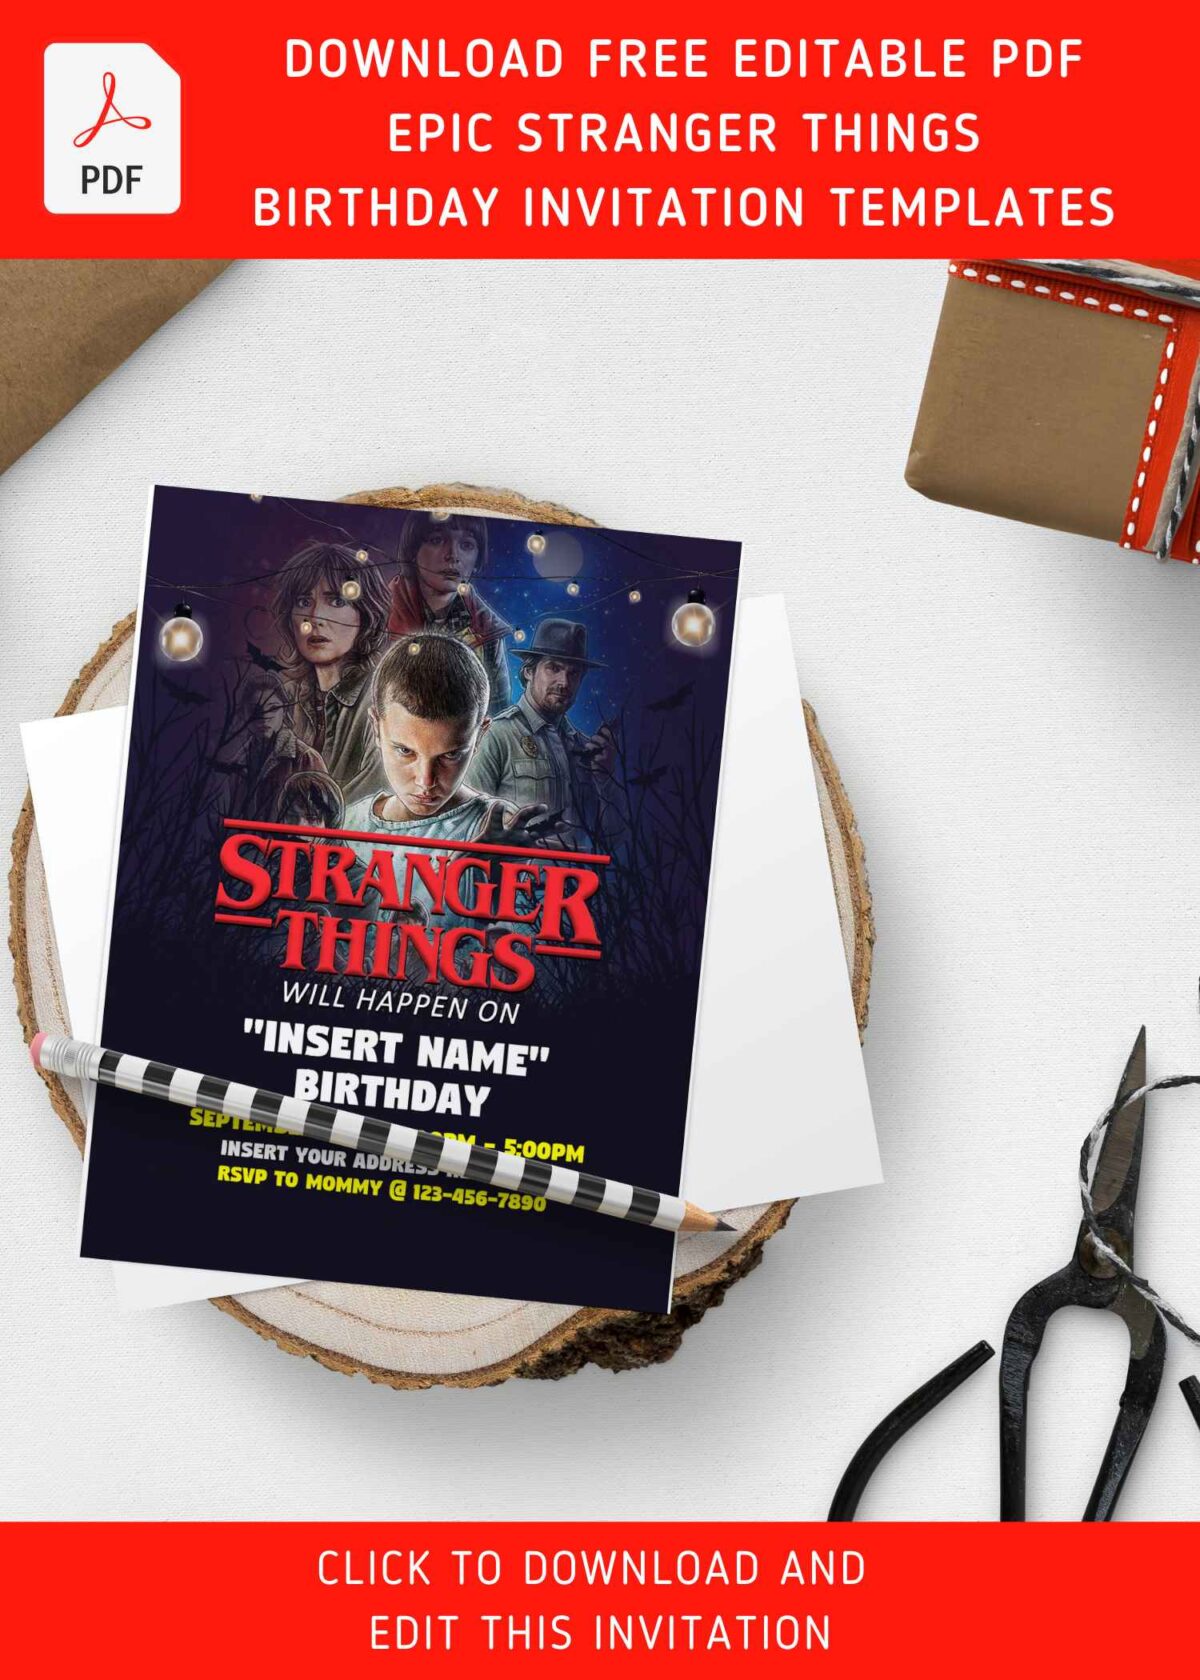 (Free Editable PDF) Stranger Things Are Happening Birthday Invitation Templates with editable text